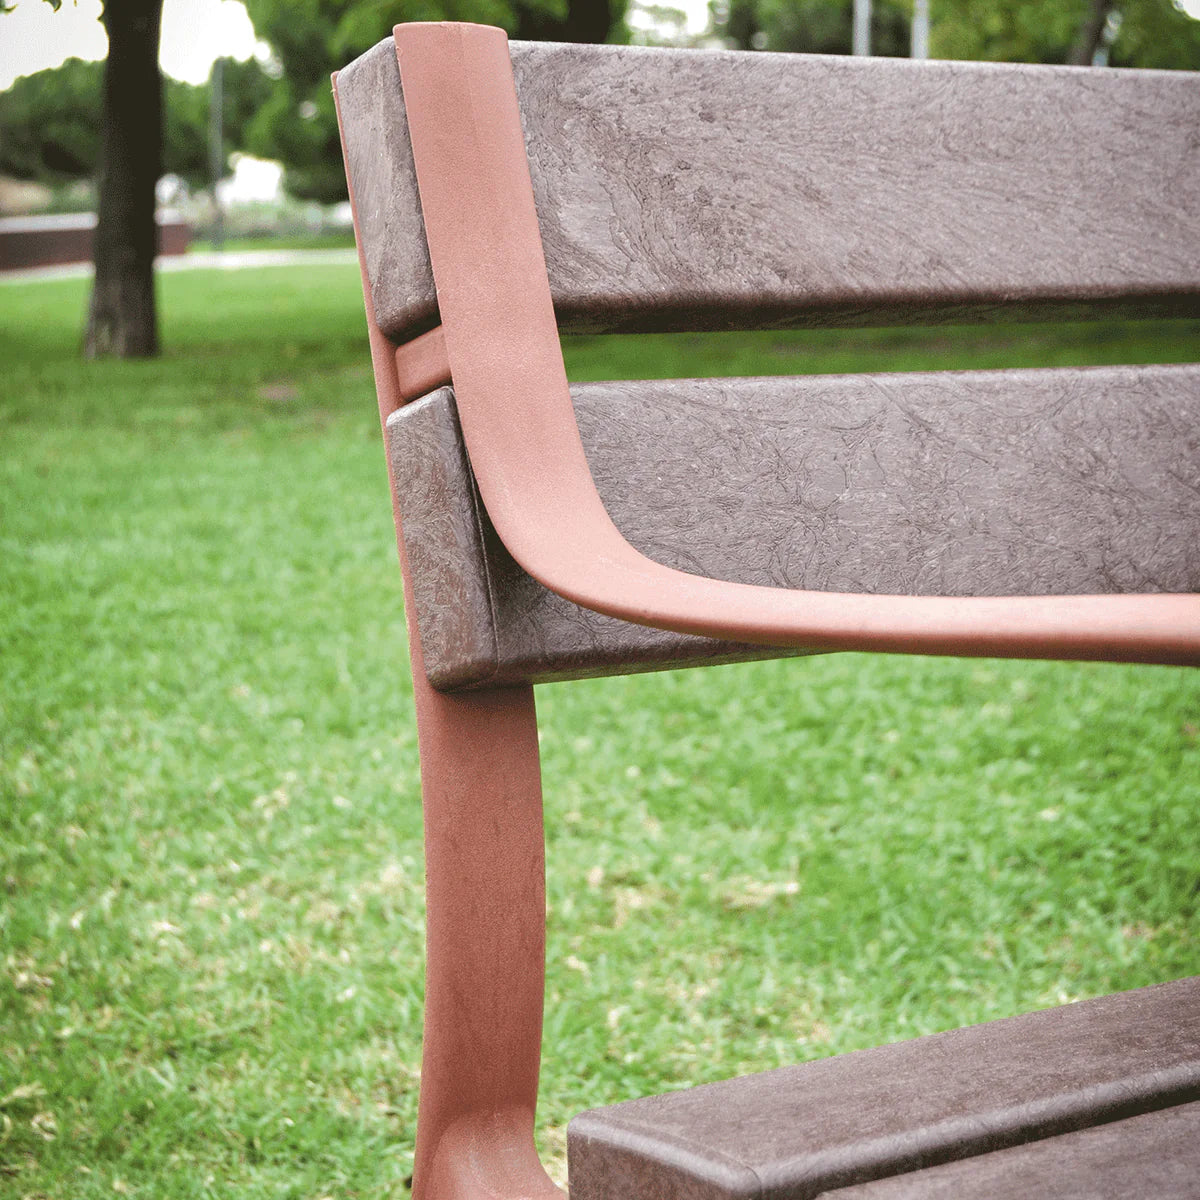 Selecting the Right Park Benches for Your Next Public Space Project